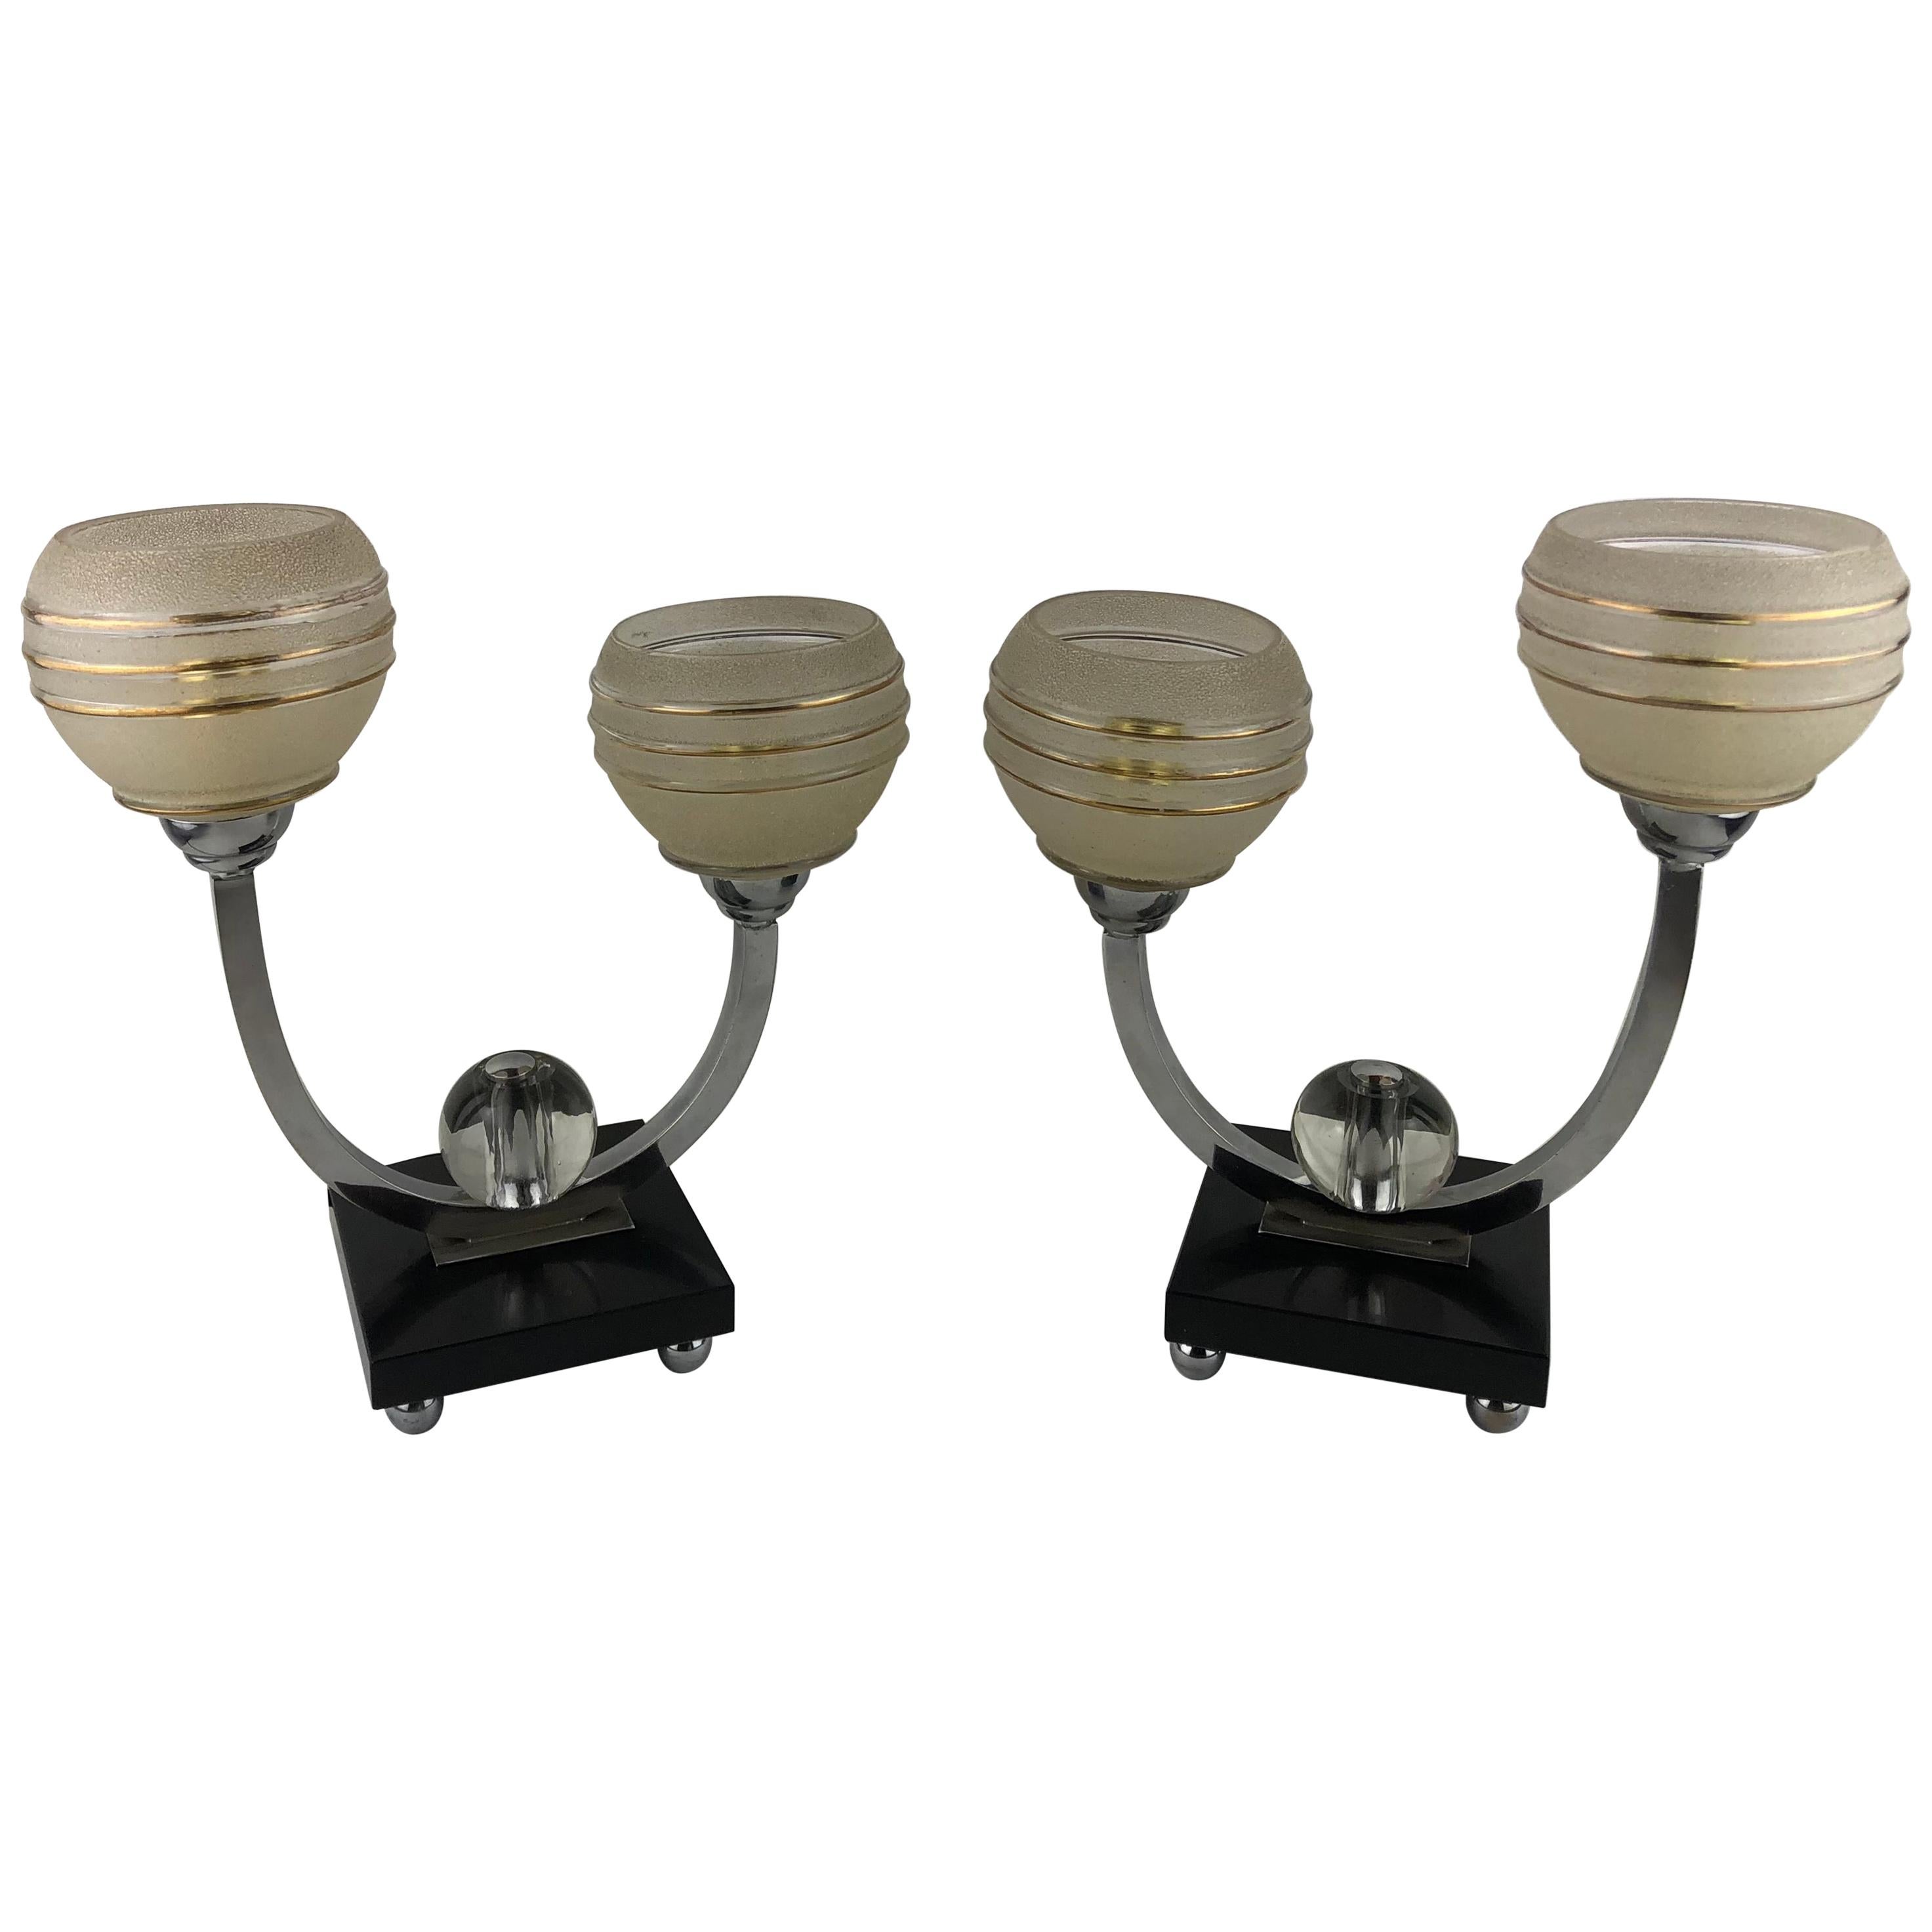 Pair of French Art Deco Lamps in Wrought Iron with Colored Glass Shades